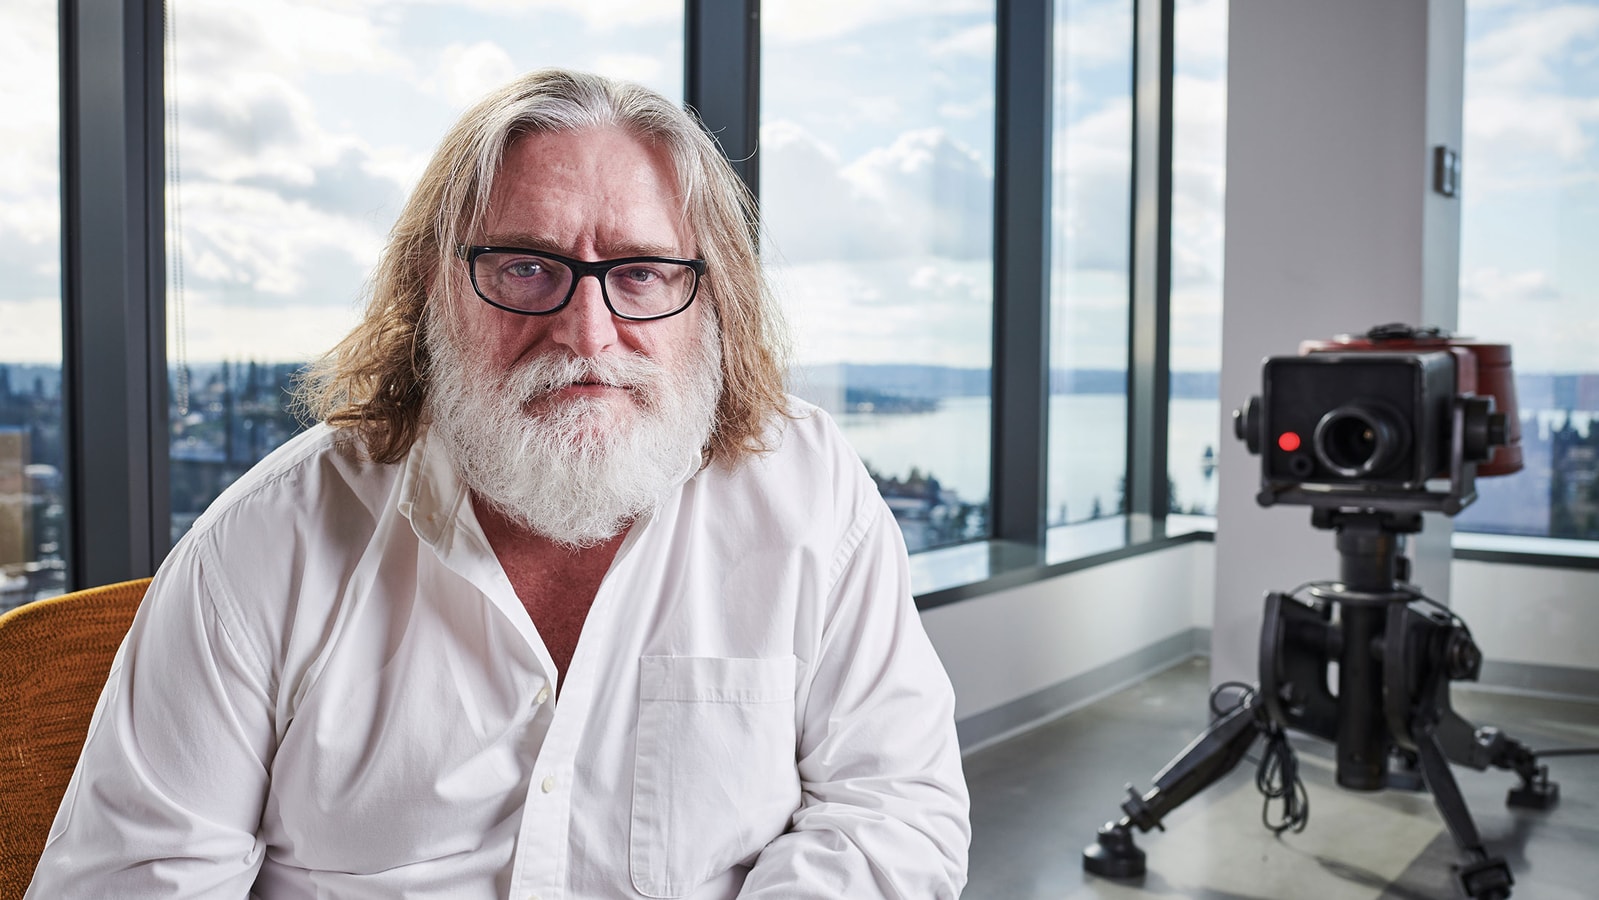 Valve vs Wolfire Games: Gabe Newell will have to attend antitrust legal battle